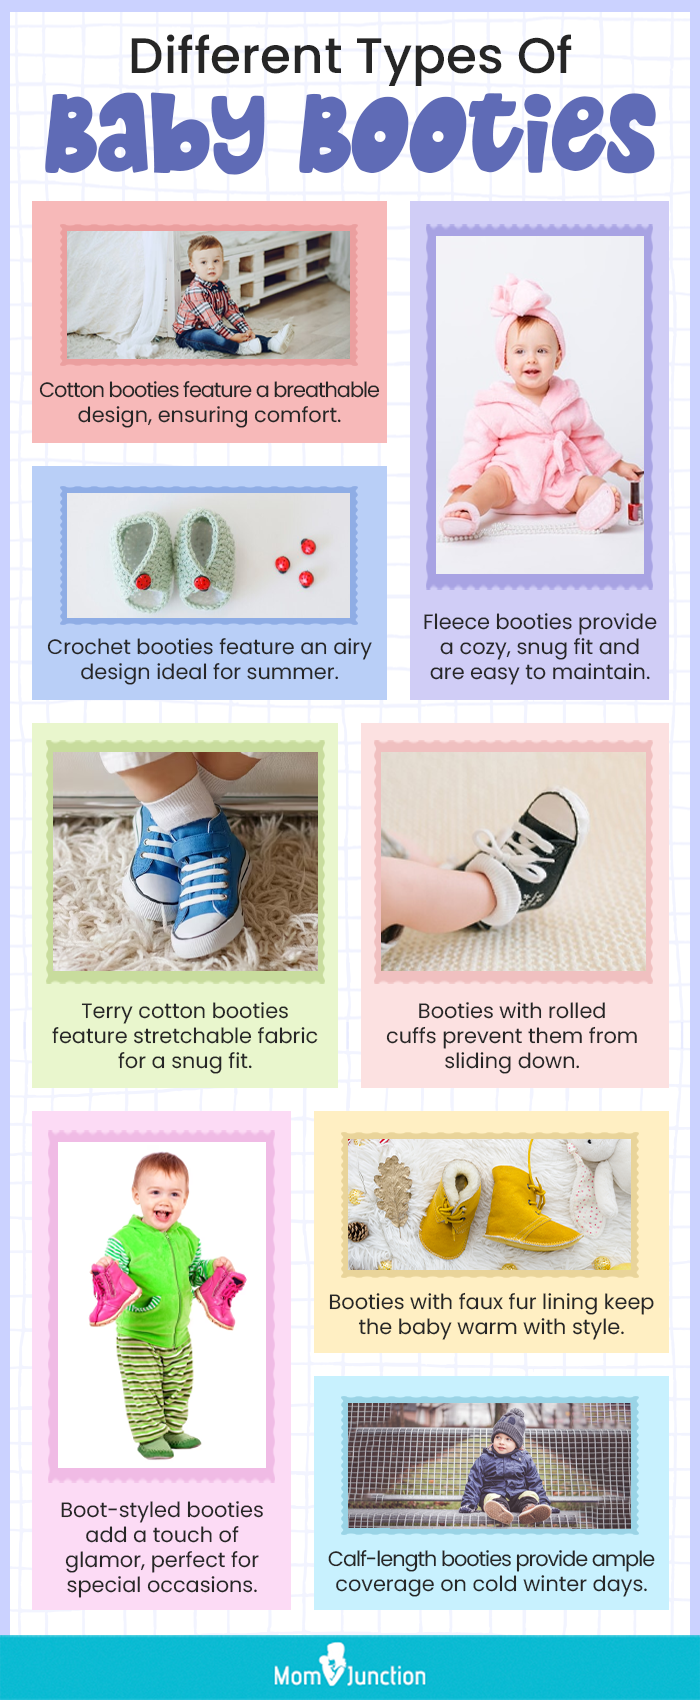 Different Types Of Baby Booties (infographic)